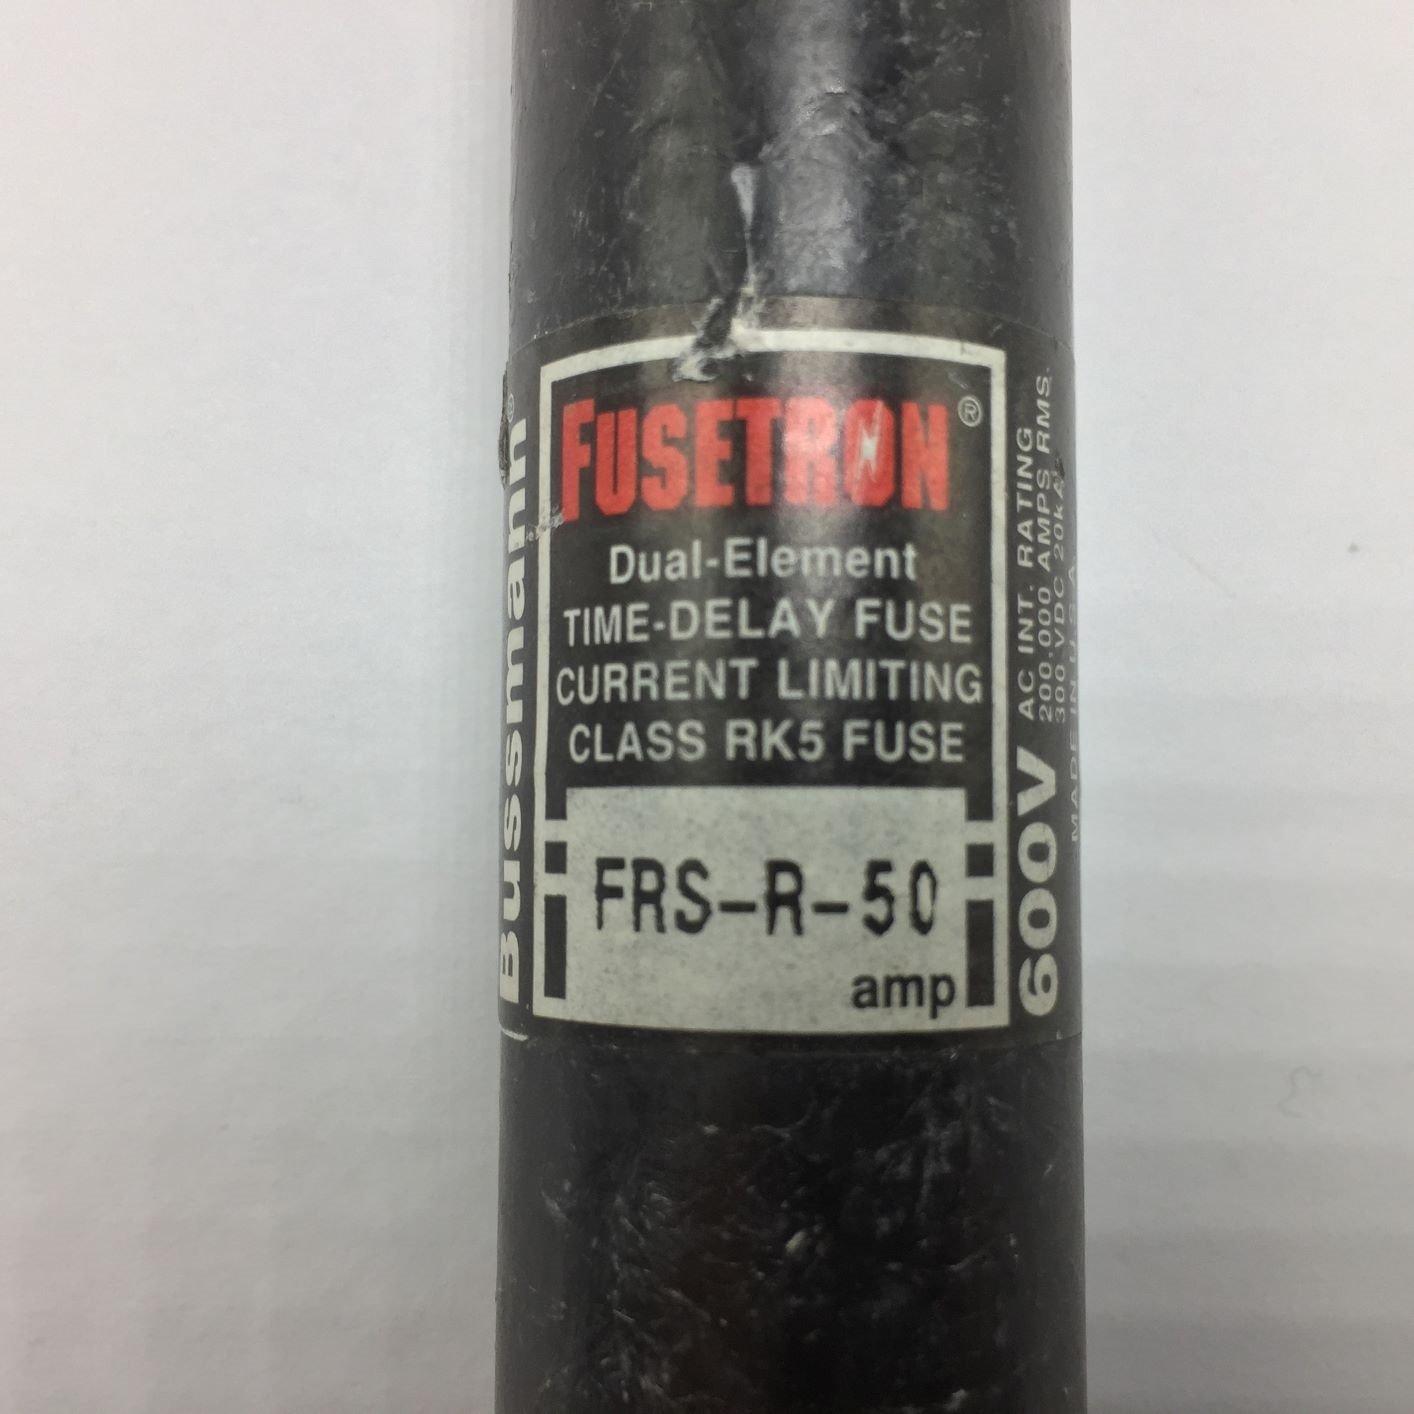 BUSSMANN/FUSETRON FRS-R-50 TIME DELAY FUSE 50A 600VAC 300VDC Lot of 2